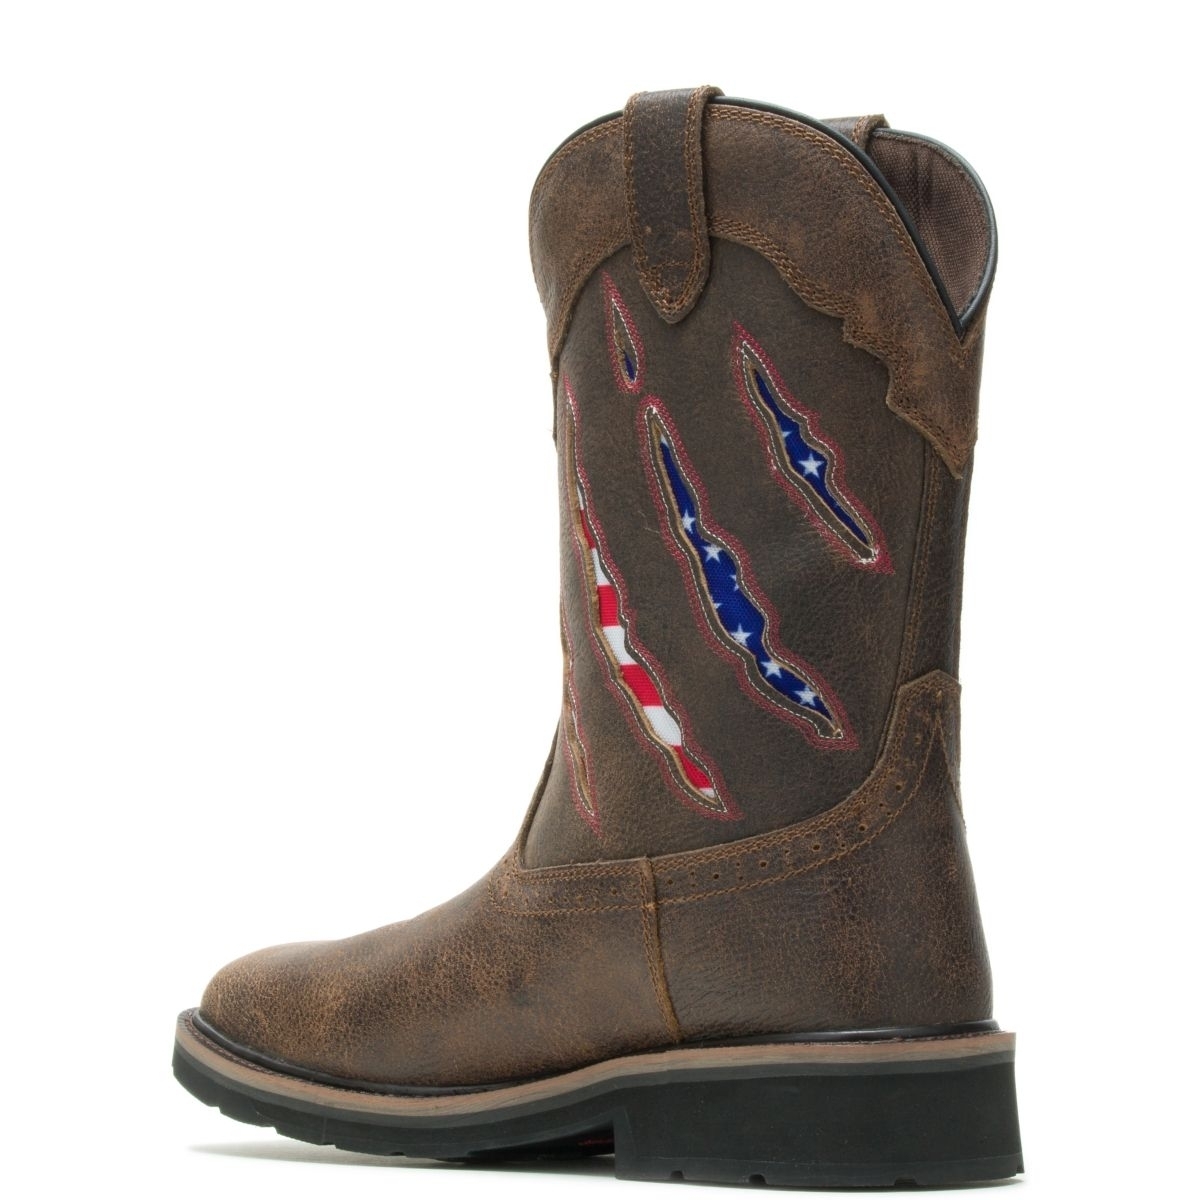 WOLVERINE Men's Rancher Claw Wellington Soft Toe Work Boot Brown/Flag - W200138 Flag/brown - Flag/brown, 9 X-Wide